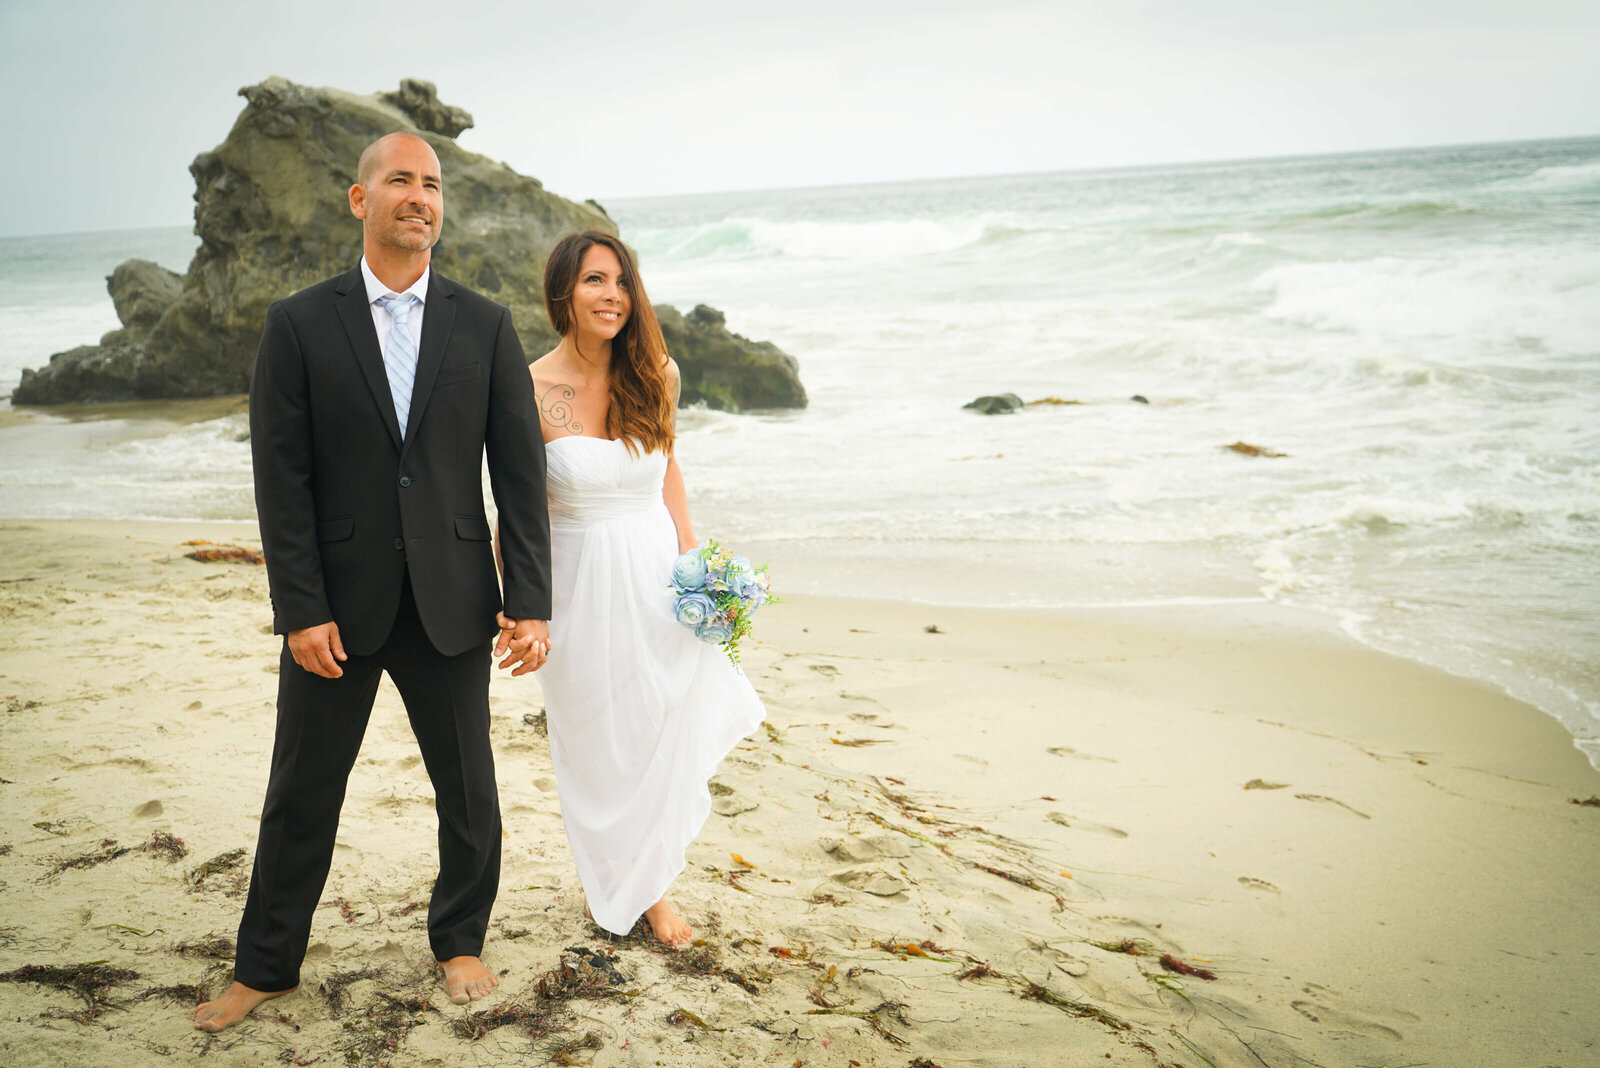 Weddings and Family Portraits in Orange County bride and groom walking together along the beach in Newport Beach, CA